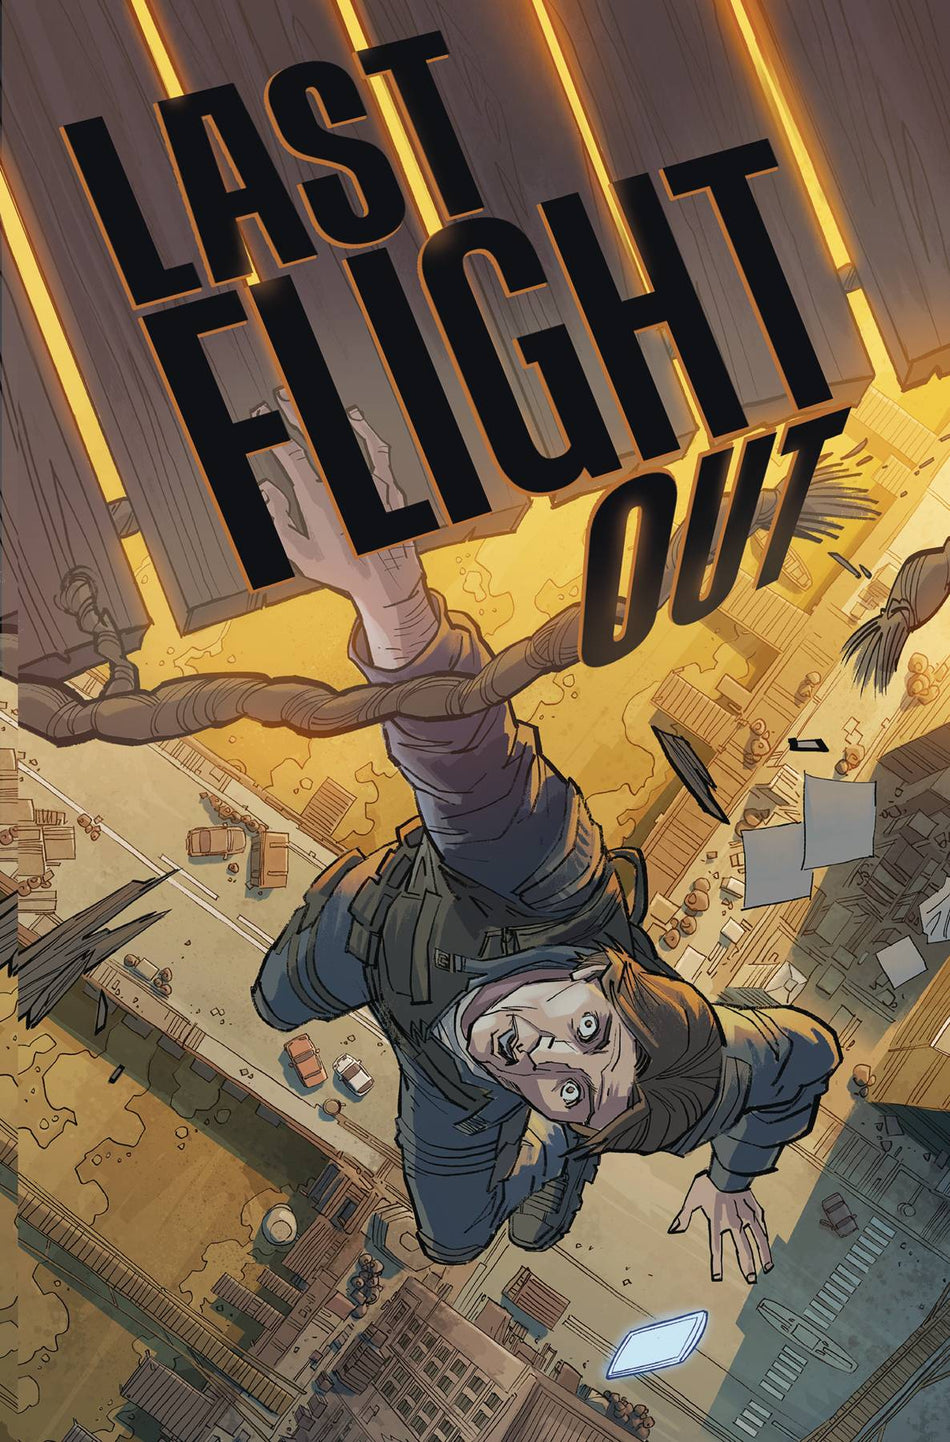 Photo of Last Flight Out Issue 2 (of 6) comic sold by Stronghold Collectibles